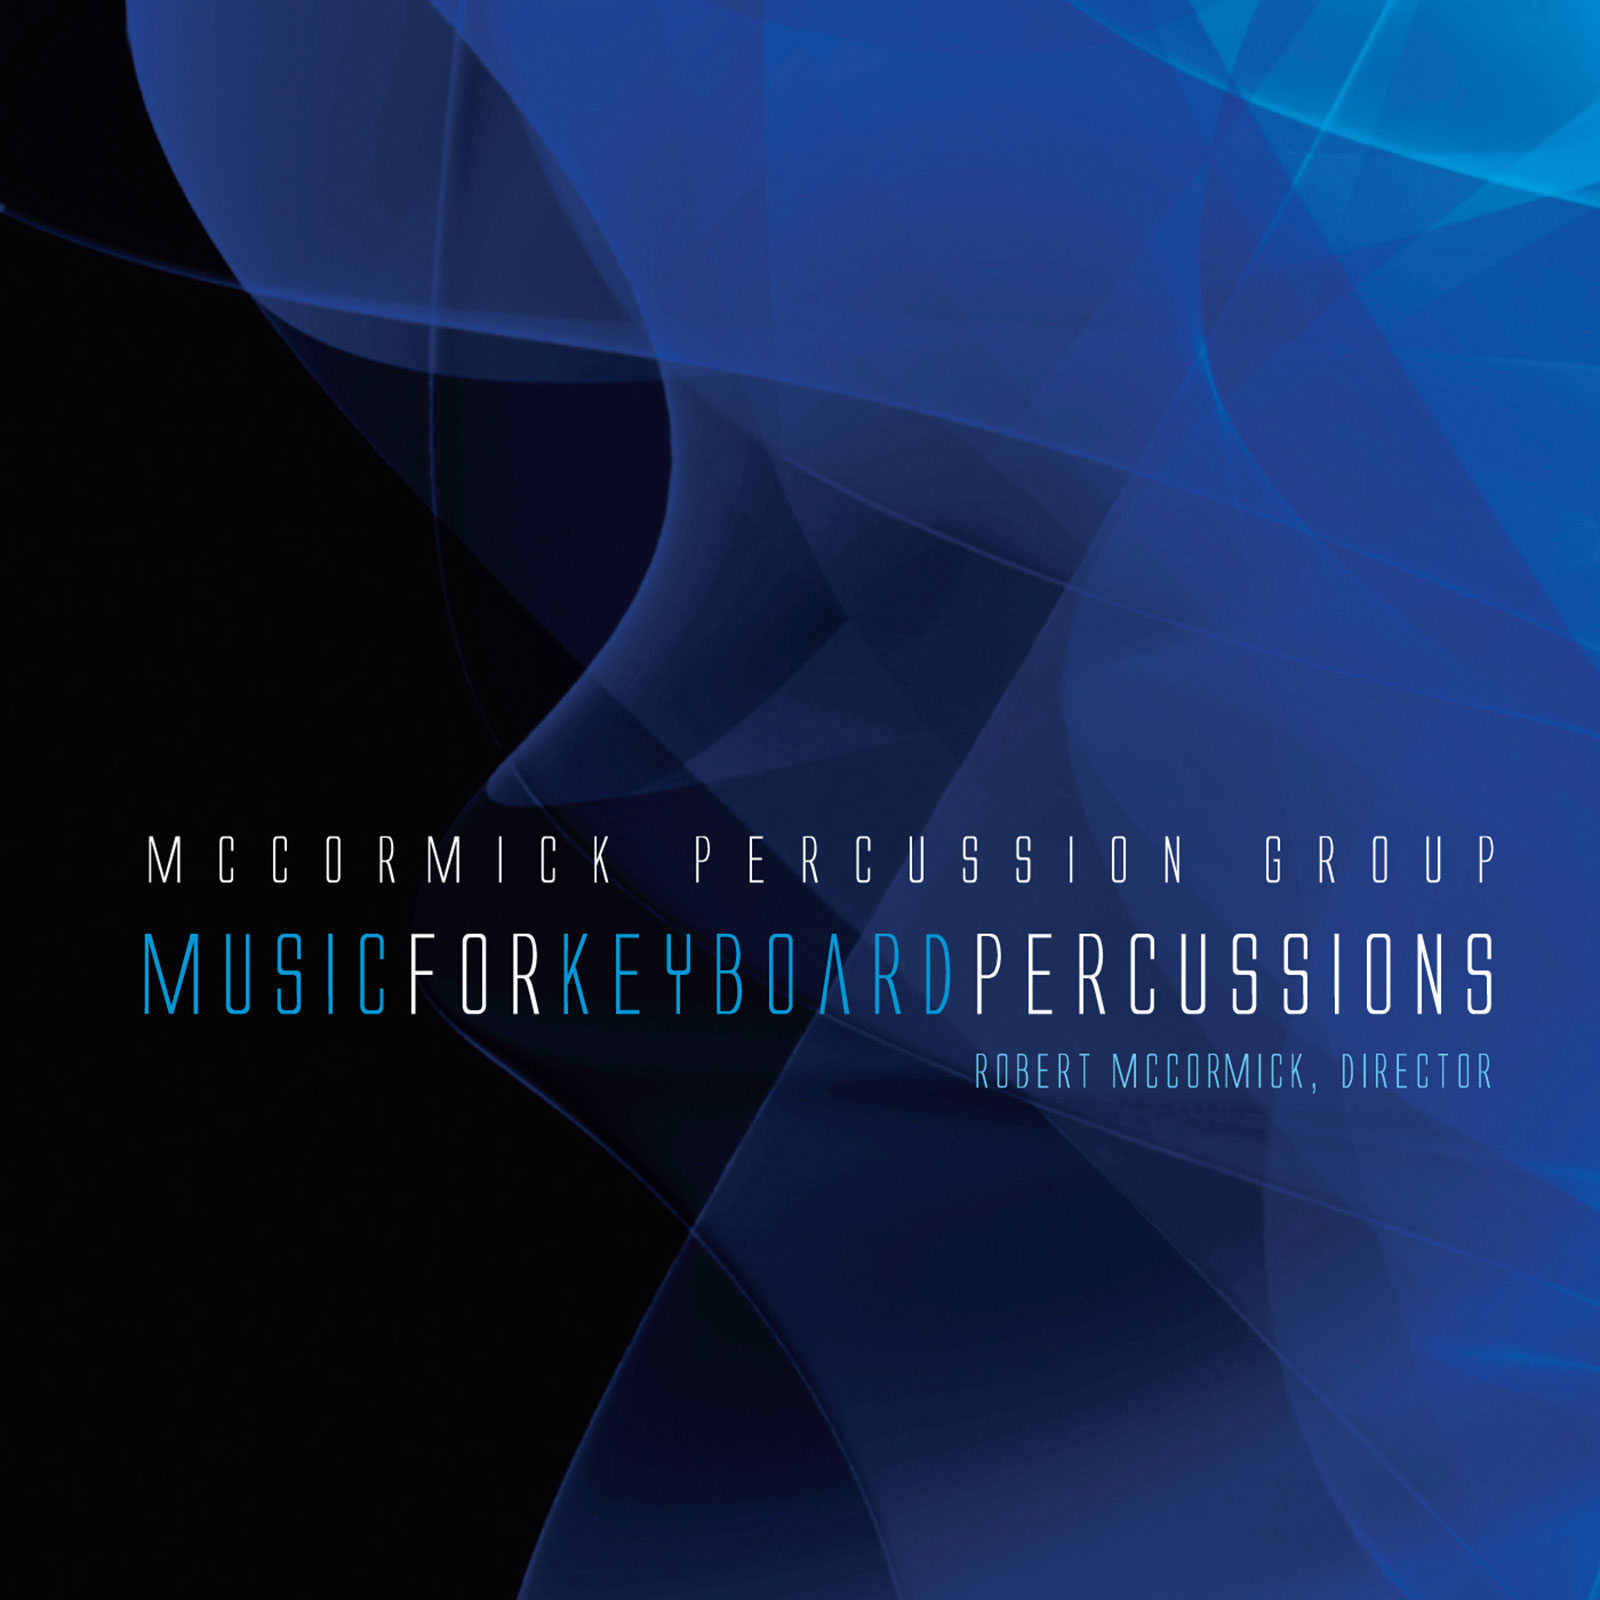 McCormick Percussion Group: Music for Keyboard Percussions